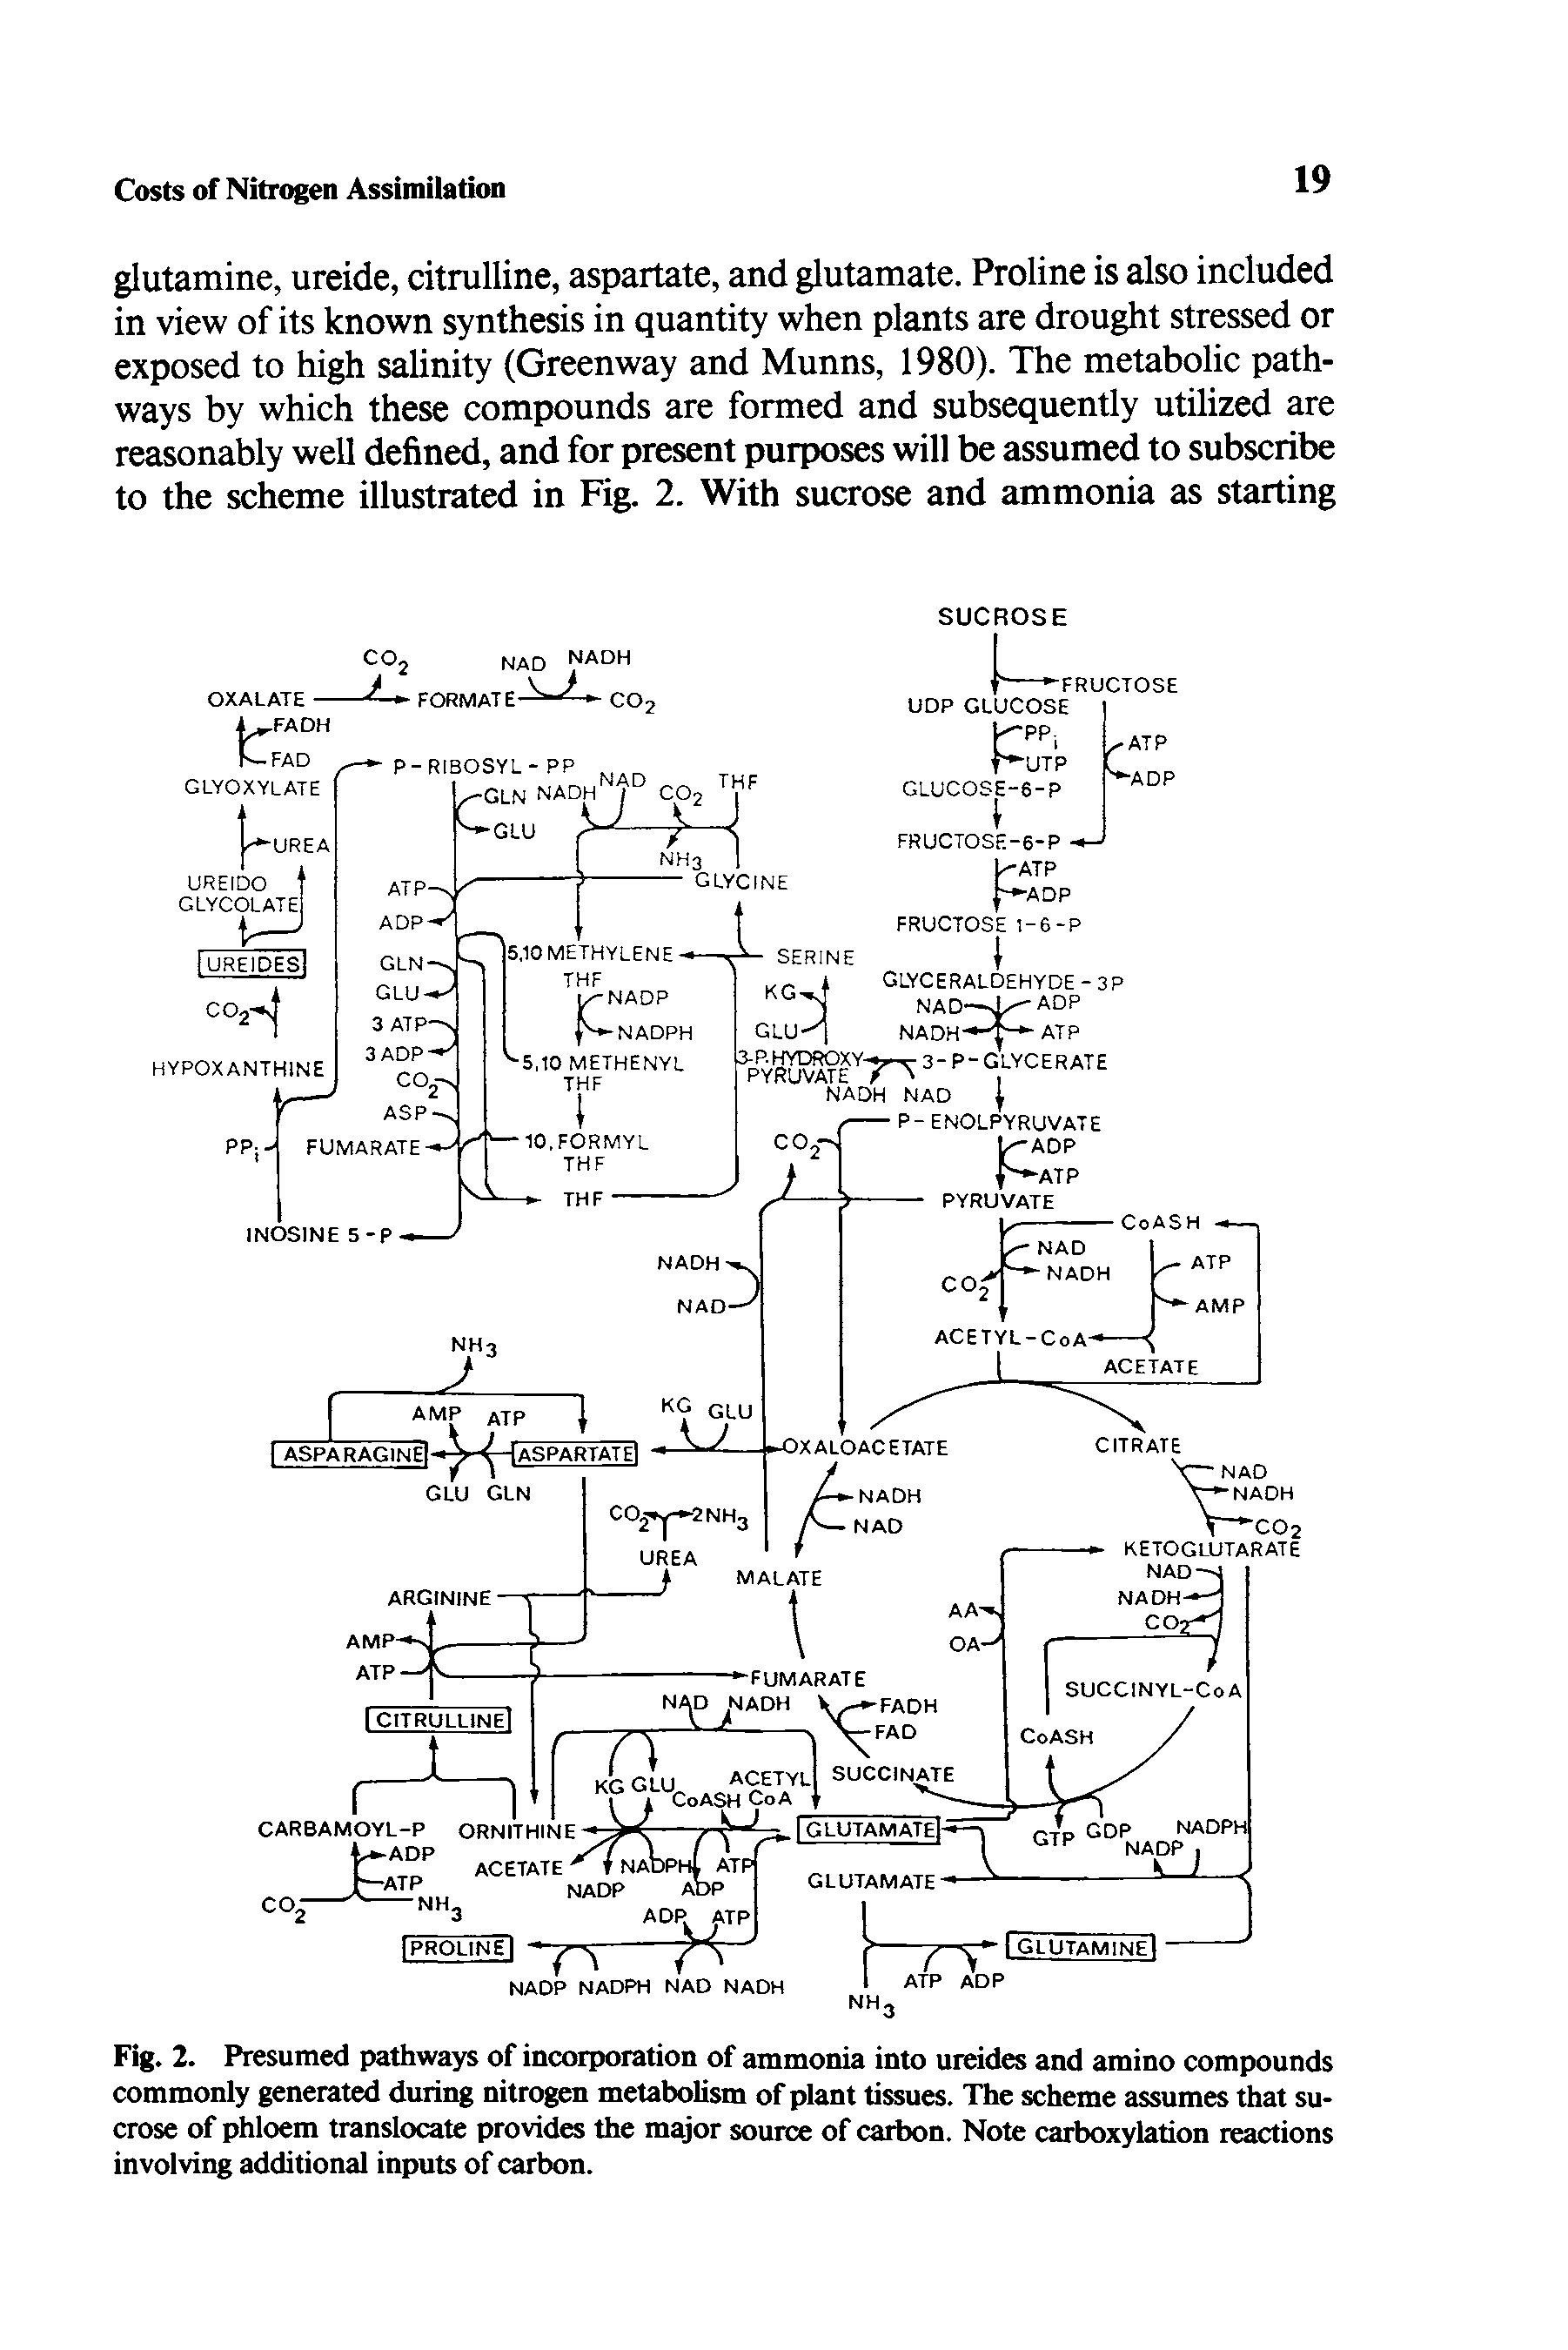 Fig. 2. Presumed pathways of incorporation of ammonia into uieides and amino compounds commonly generated during nitrogen metabolism of plant tissues. The scheme assumes that sucrose of phloem translocate provides the major source of carbon. Note carboxylation reactions involving additional inputs of carbon.